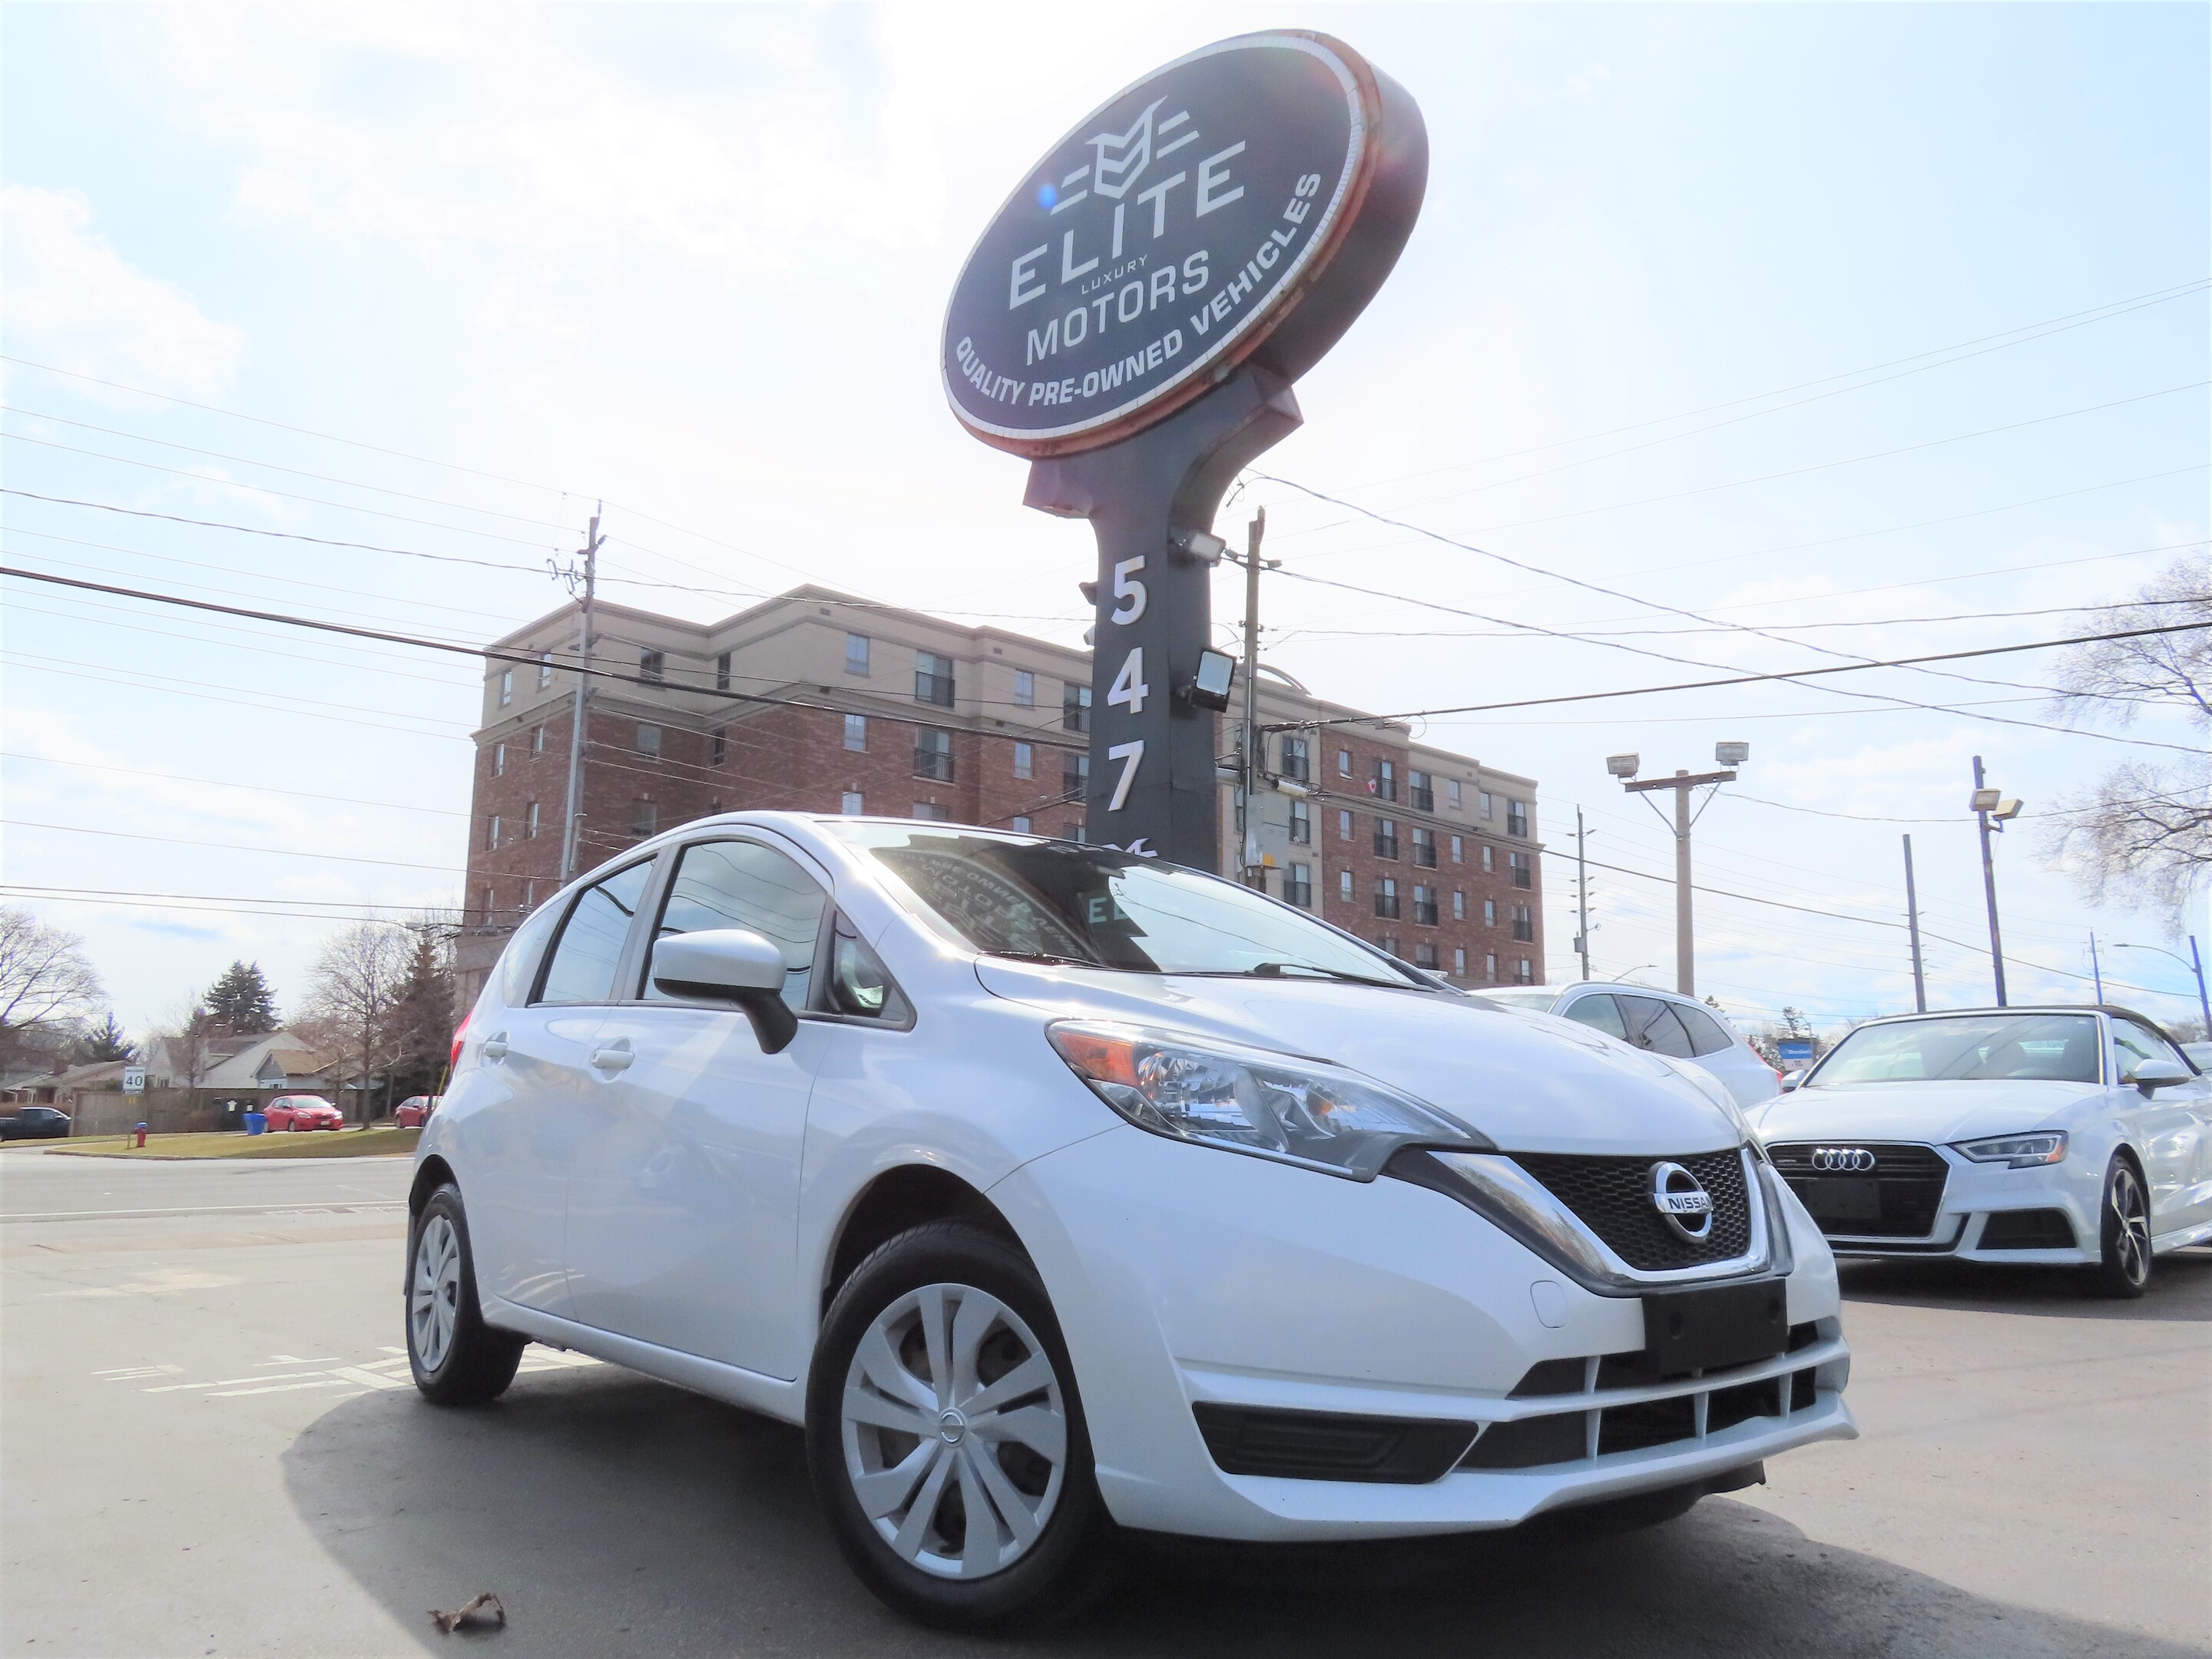 2018 Nissan Versa Note S CVT - AUTOMATIC - 3-YEARS WARRANTY AVAILABLE